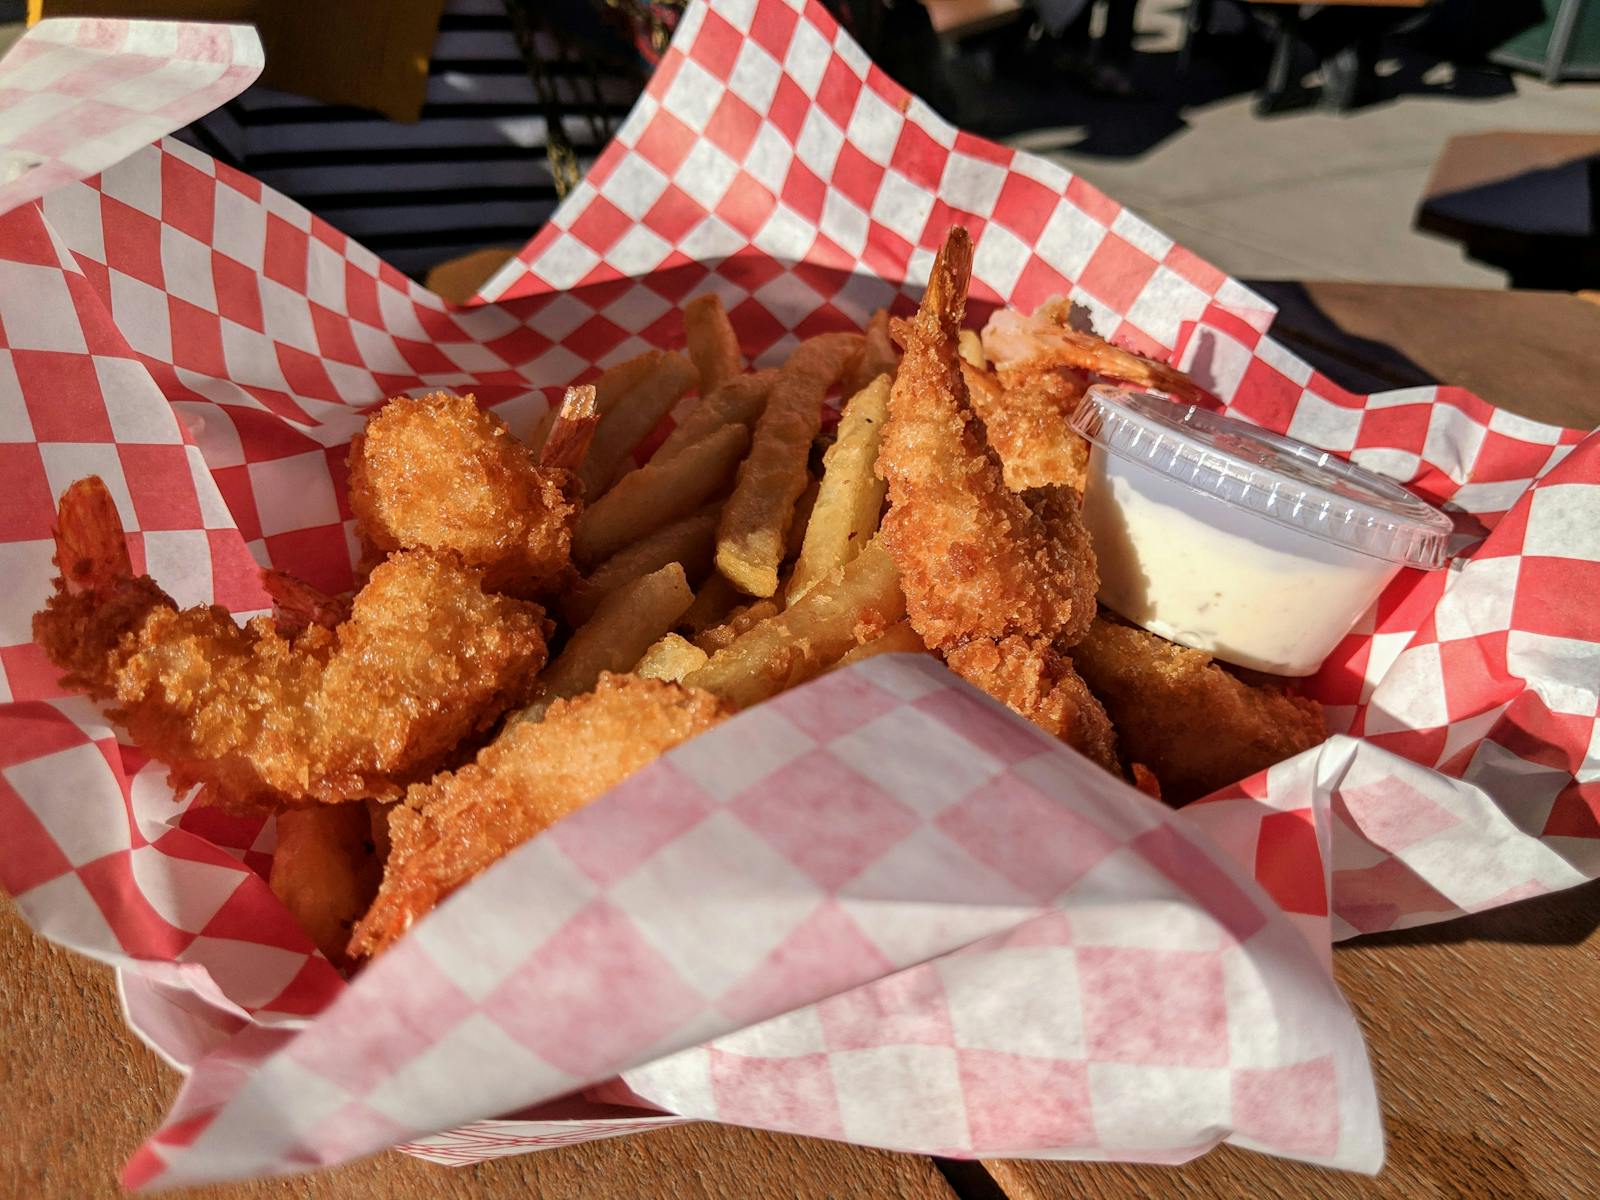 Some fish & chips from a food truck. 